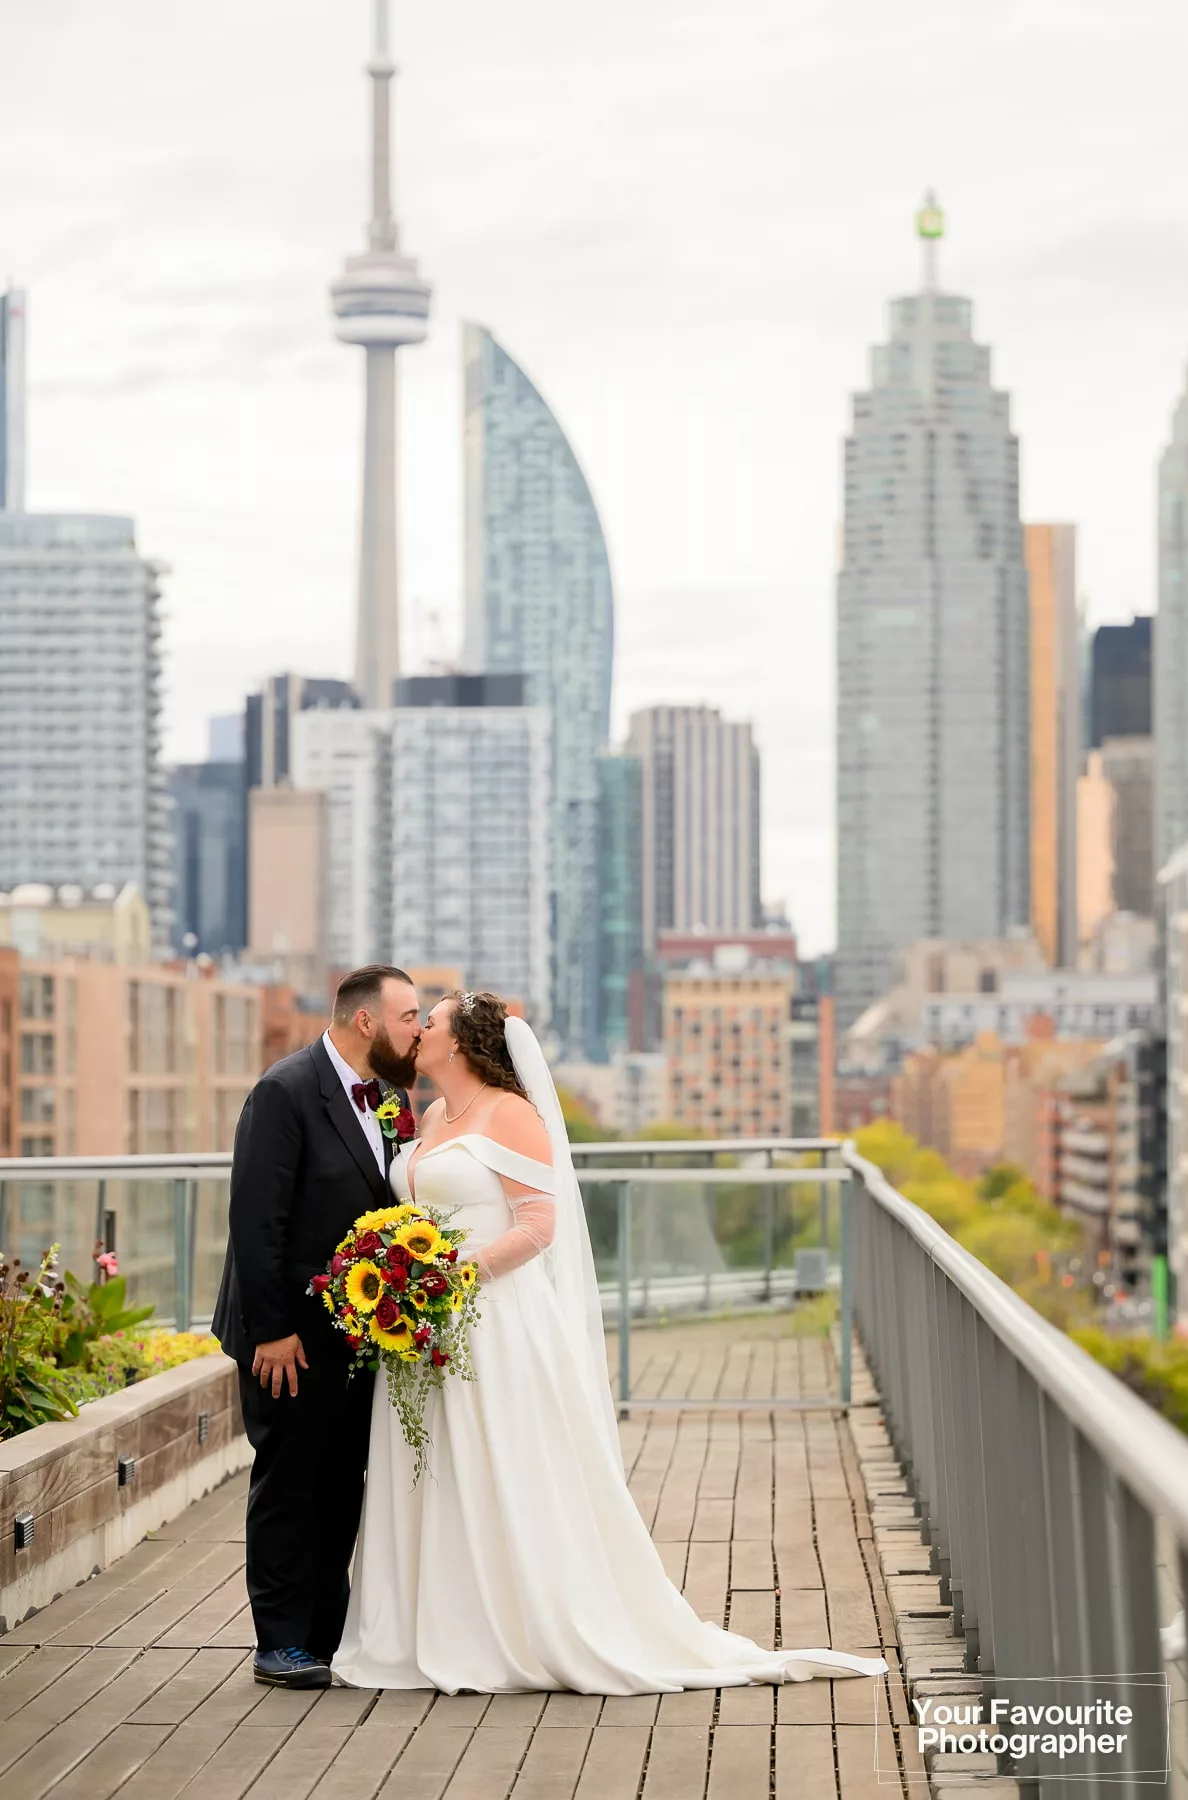 Newly married couple Emily and Niko kiss on a rooftop patio with the skyline of downtown Toronto visible in the background